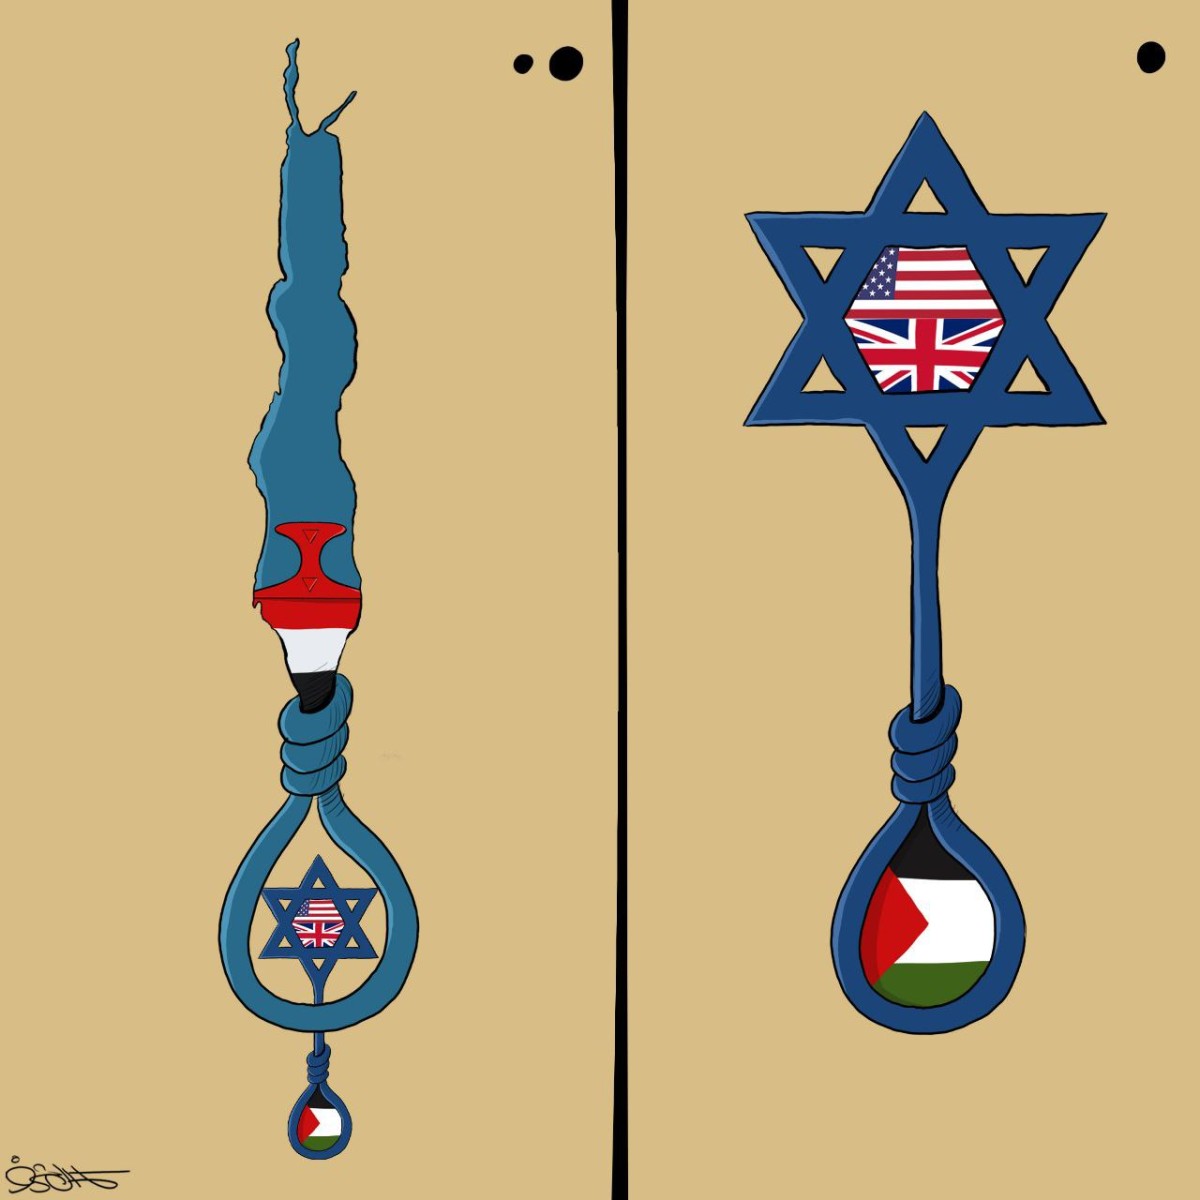 The decisive fate of Yemen against Israel and America in support of the Palestinian people